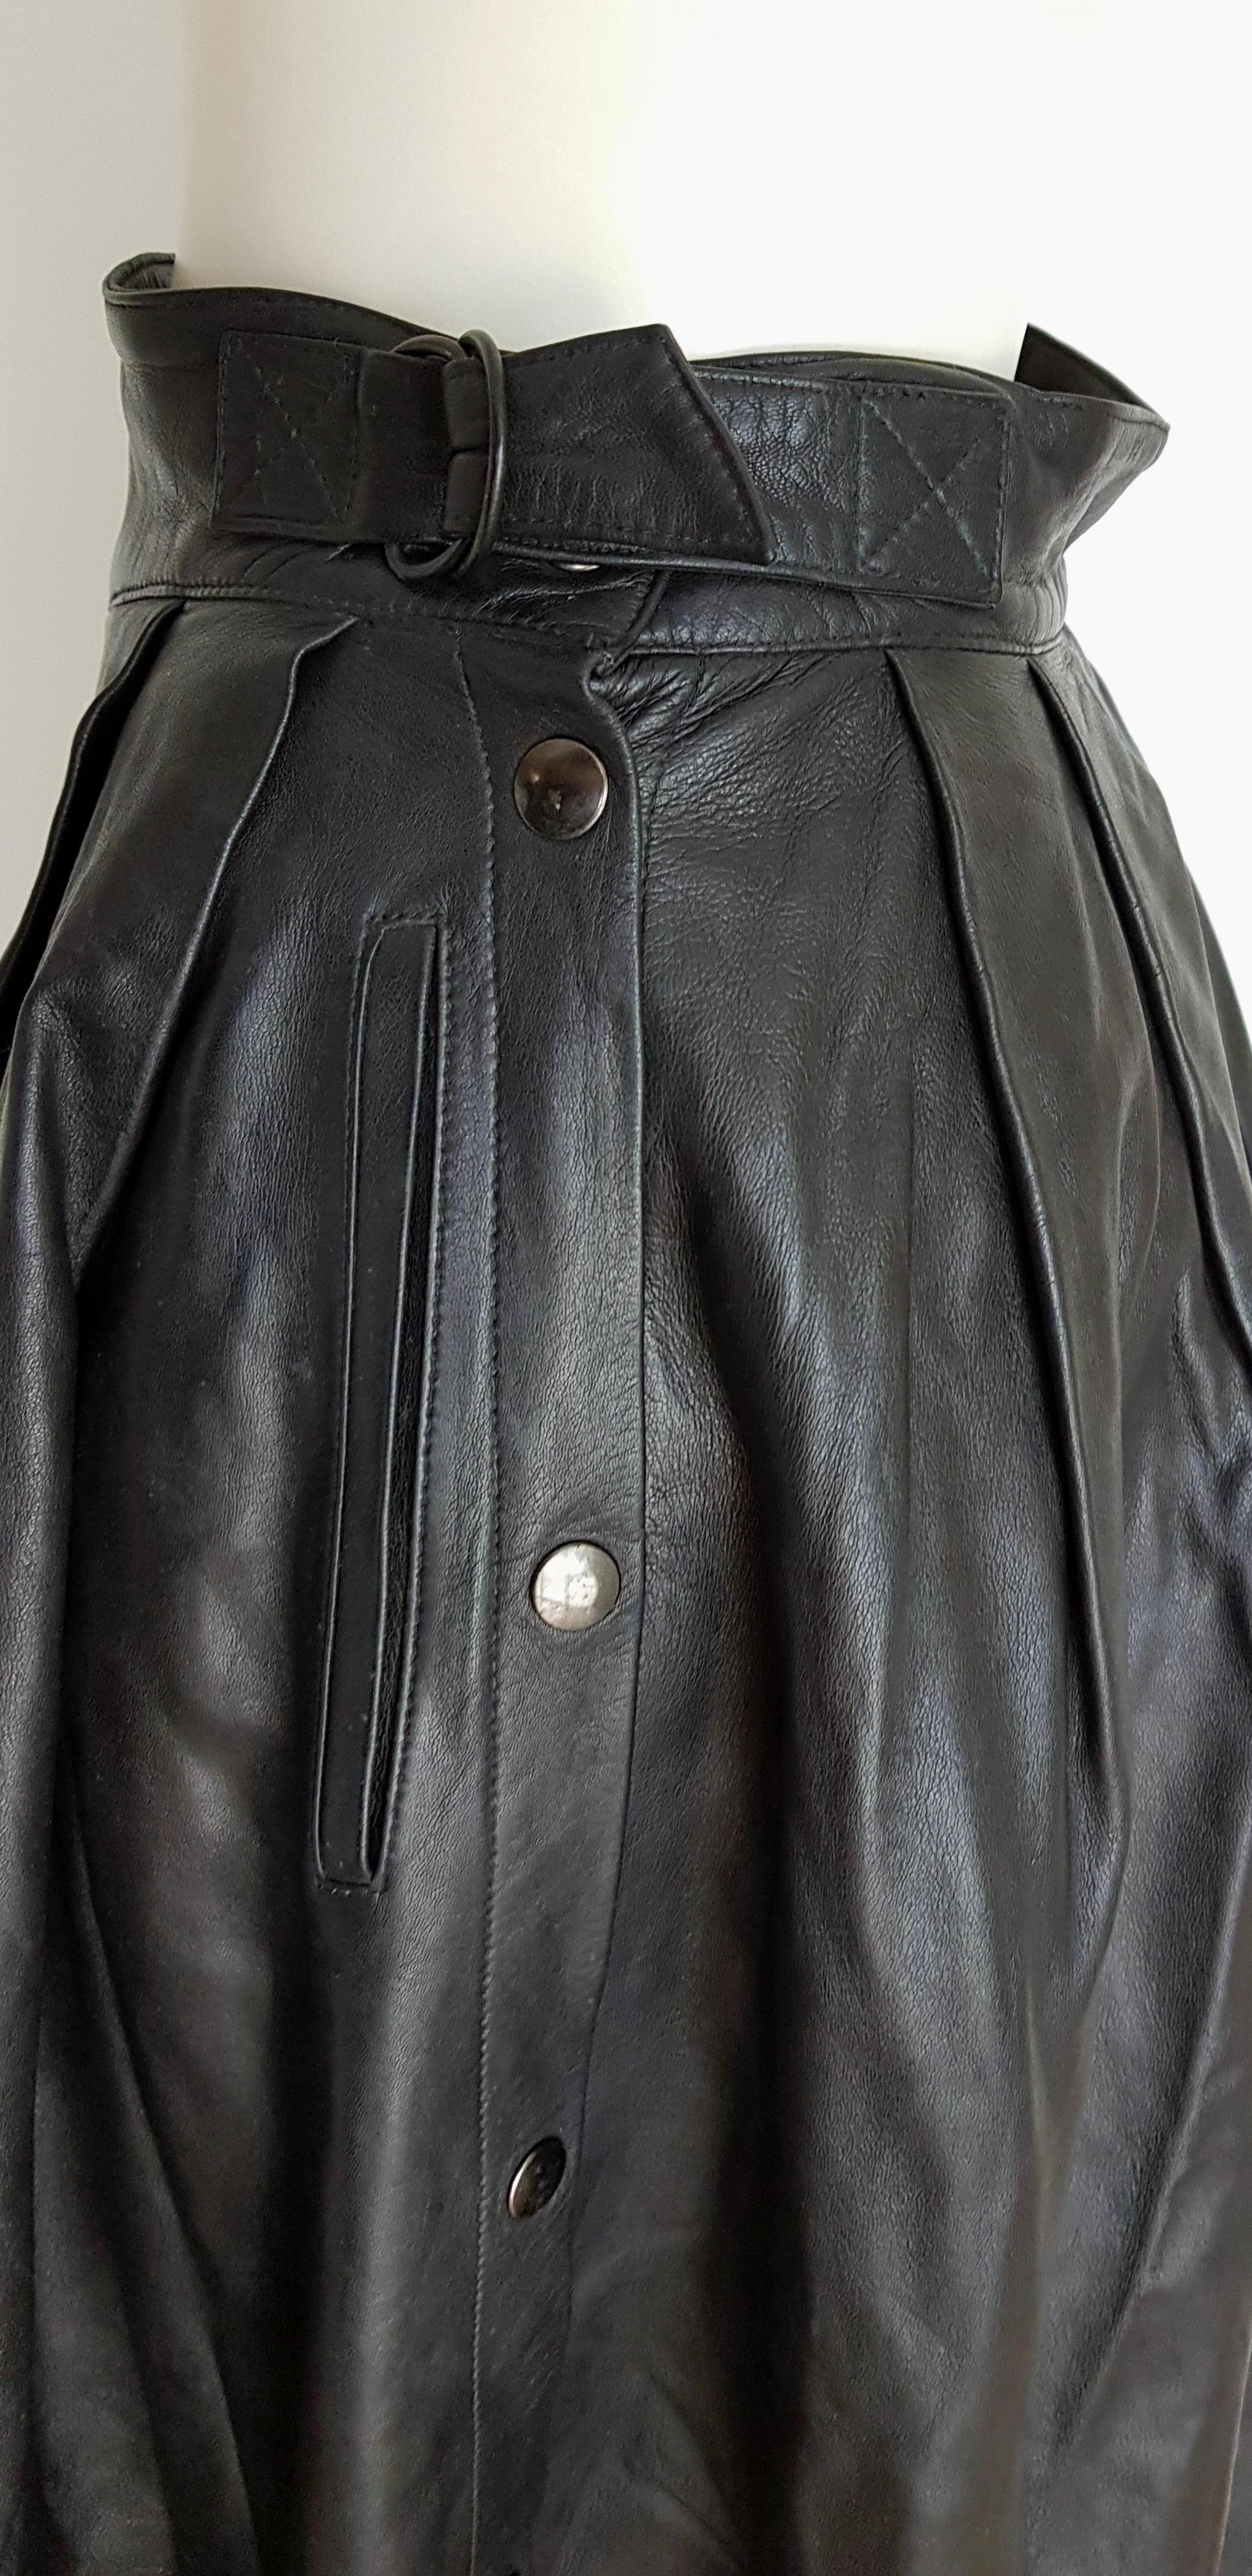 Claude MONTANA black lambskin leather buttons and buckle skirt - Unworn, New.

SIZE: equivalent to about Small / Medium, please review approx measurements as follows in cm: lenght 85, waist circumference 72. 
TO CONVERT: cm x 0.39 =